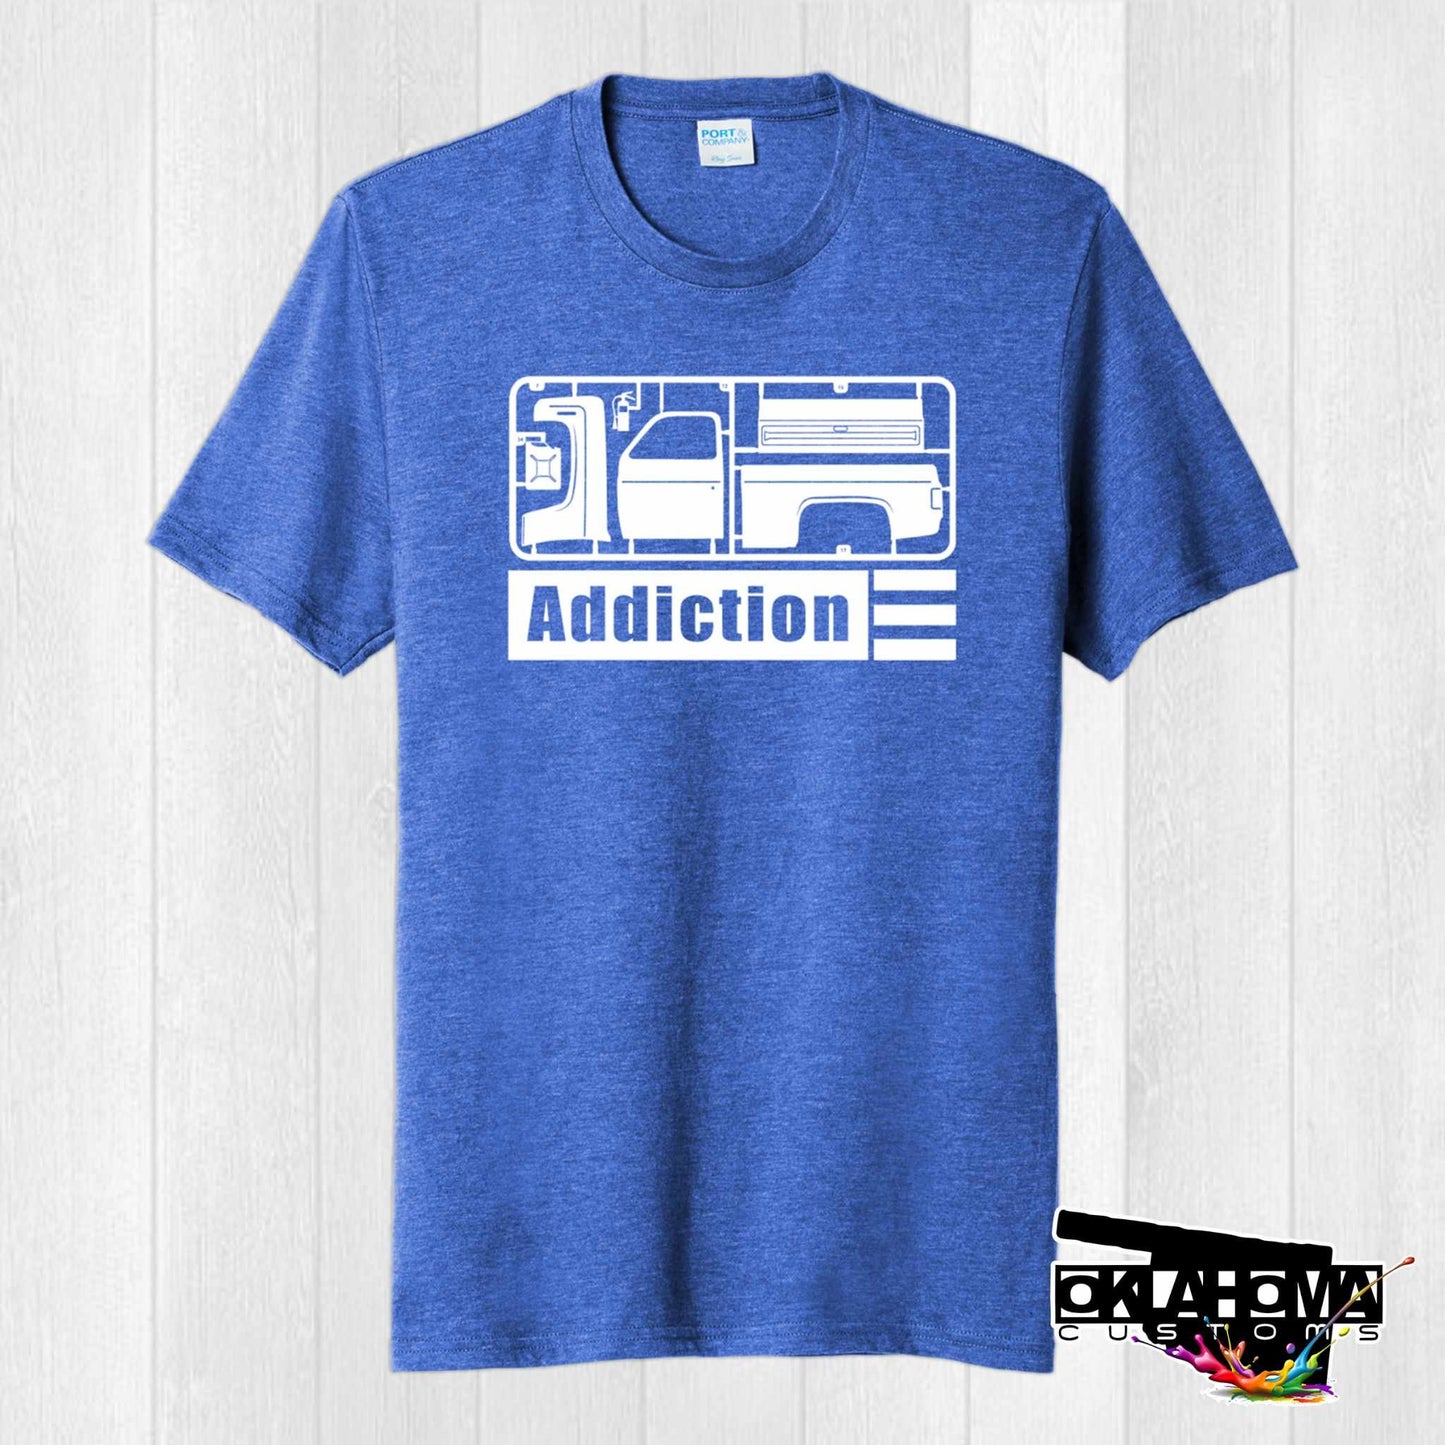 Buttery soft Squarebody C10 truck model T-shirt from GM Chevy Gmc unisex